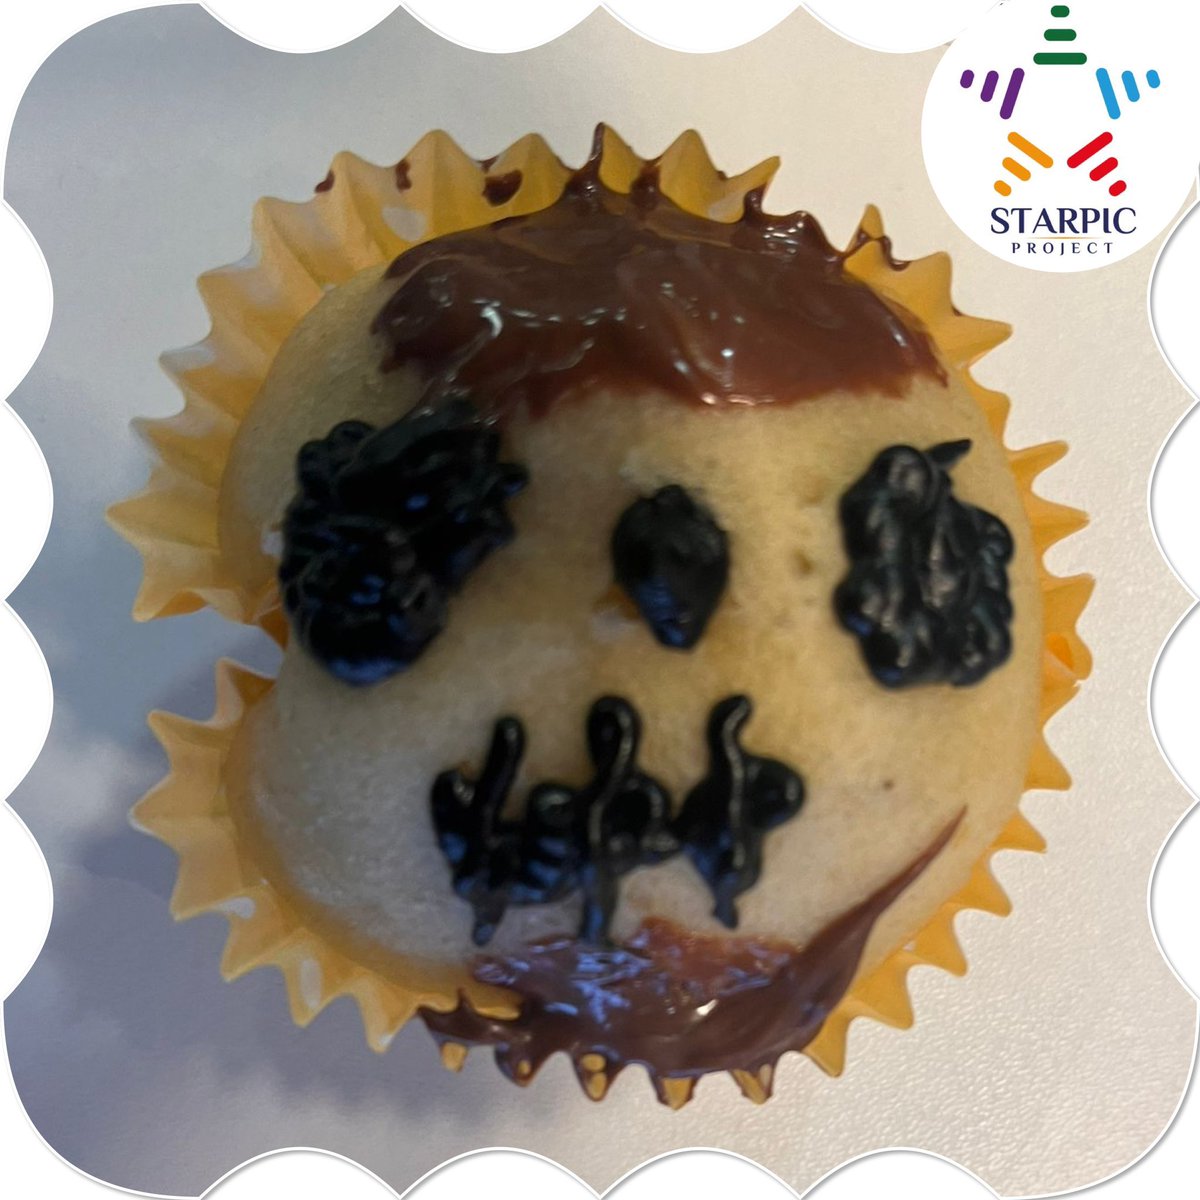 The Wednesday group making cupcakes tonight. Great fun 🧁. @YouthScotland @LAYC2015 _________________________ #youthwork #starpicproject #community #confidence #safespace #learning #transferableskillsets